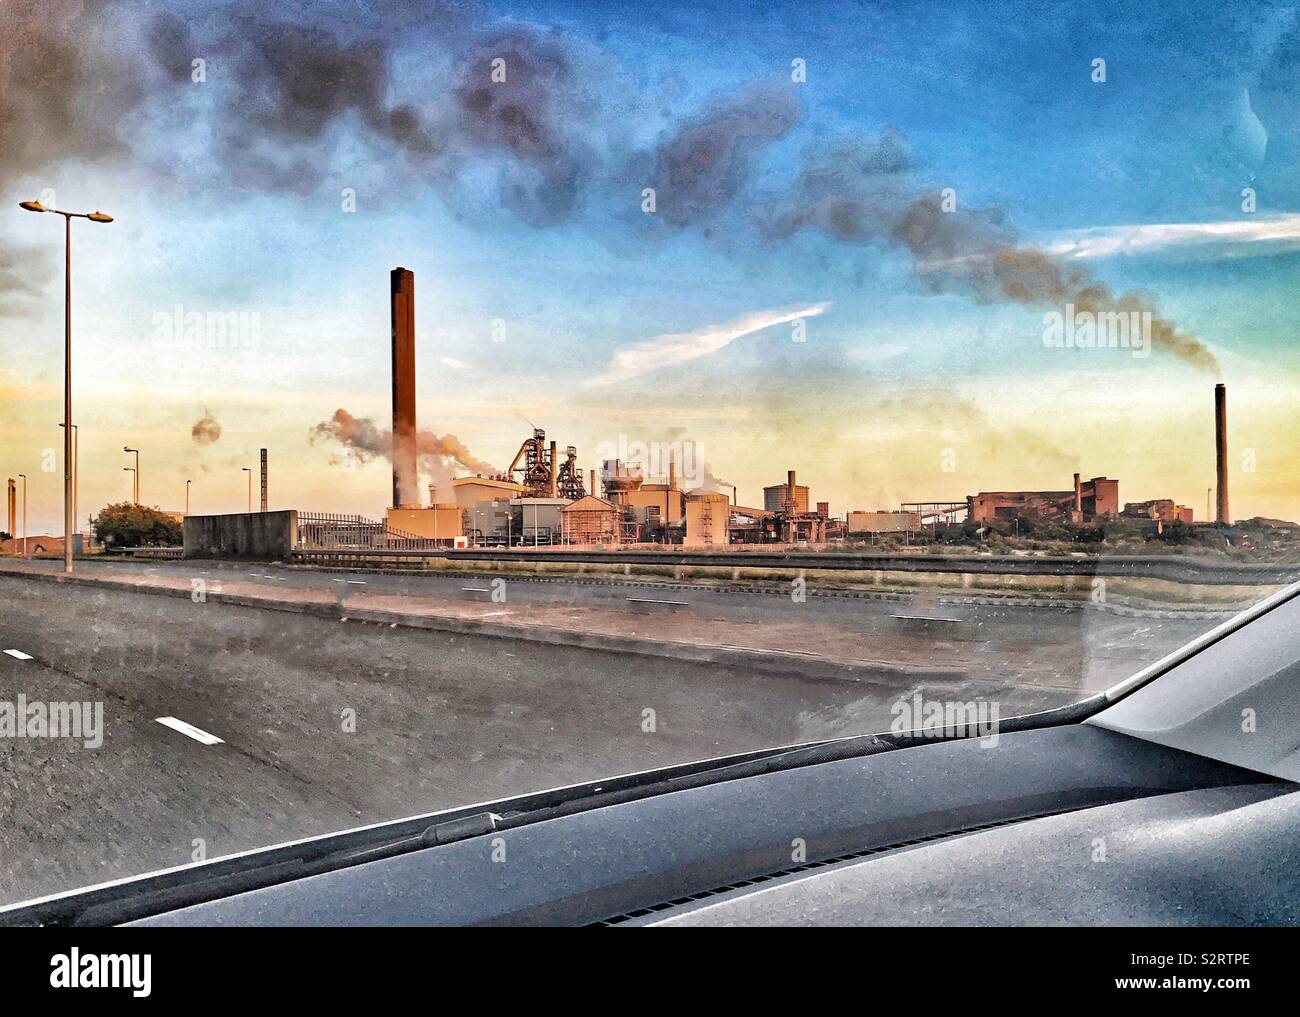 View of Port Talbot Steelworks from car Stock Photo